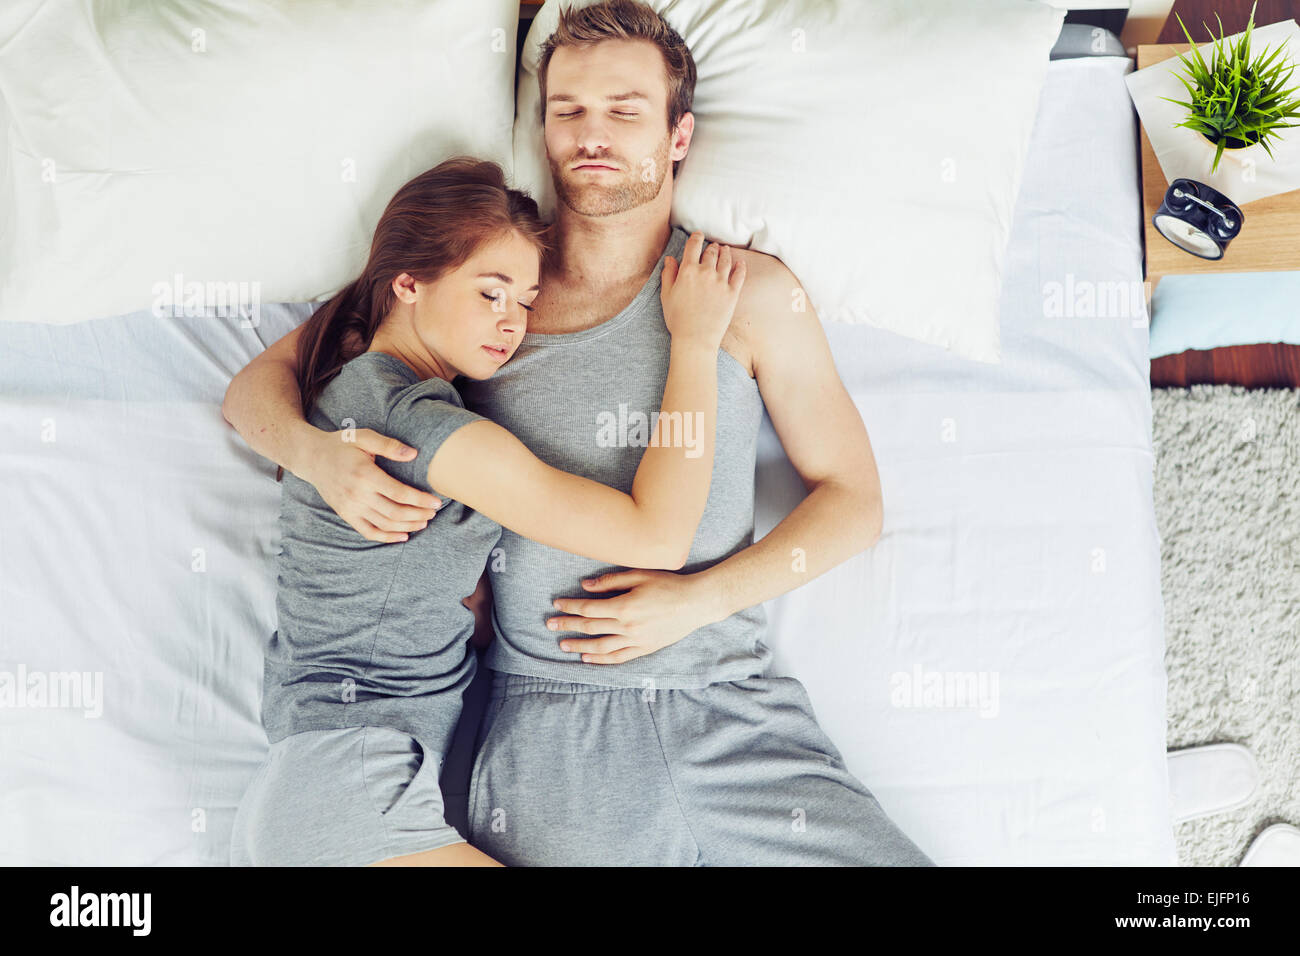 Young couple sleeping in embrace Stock Photo